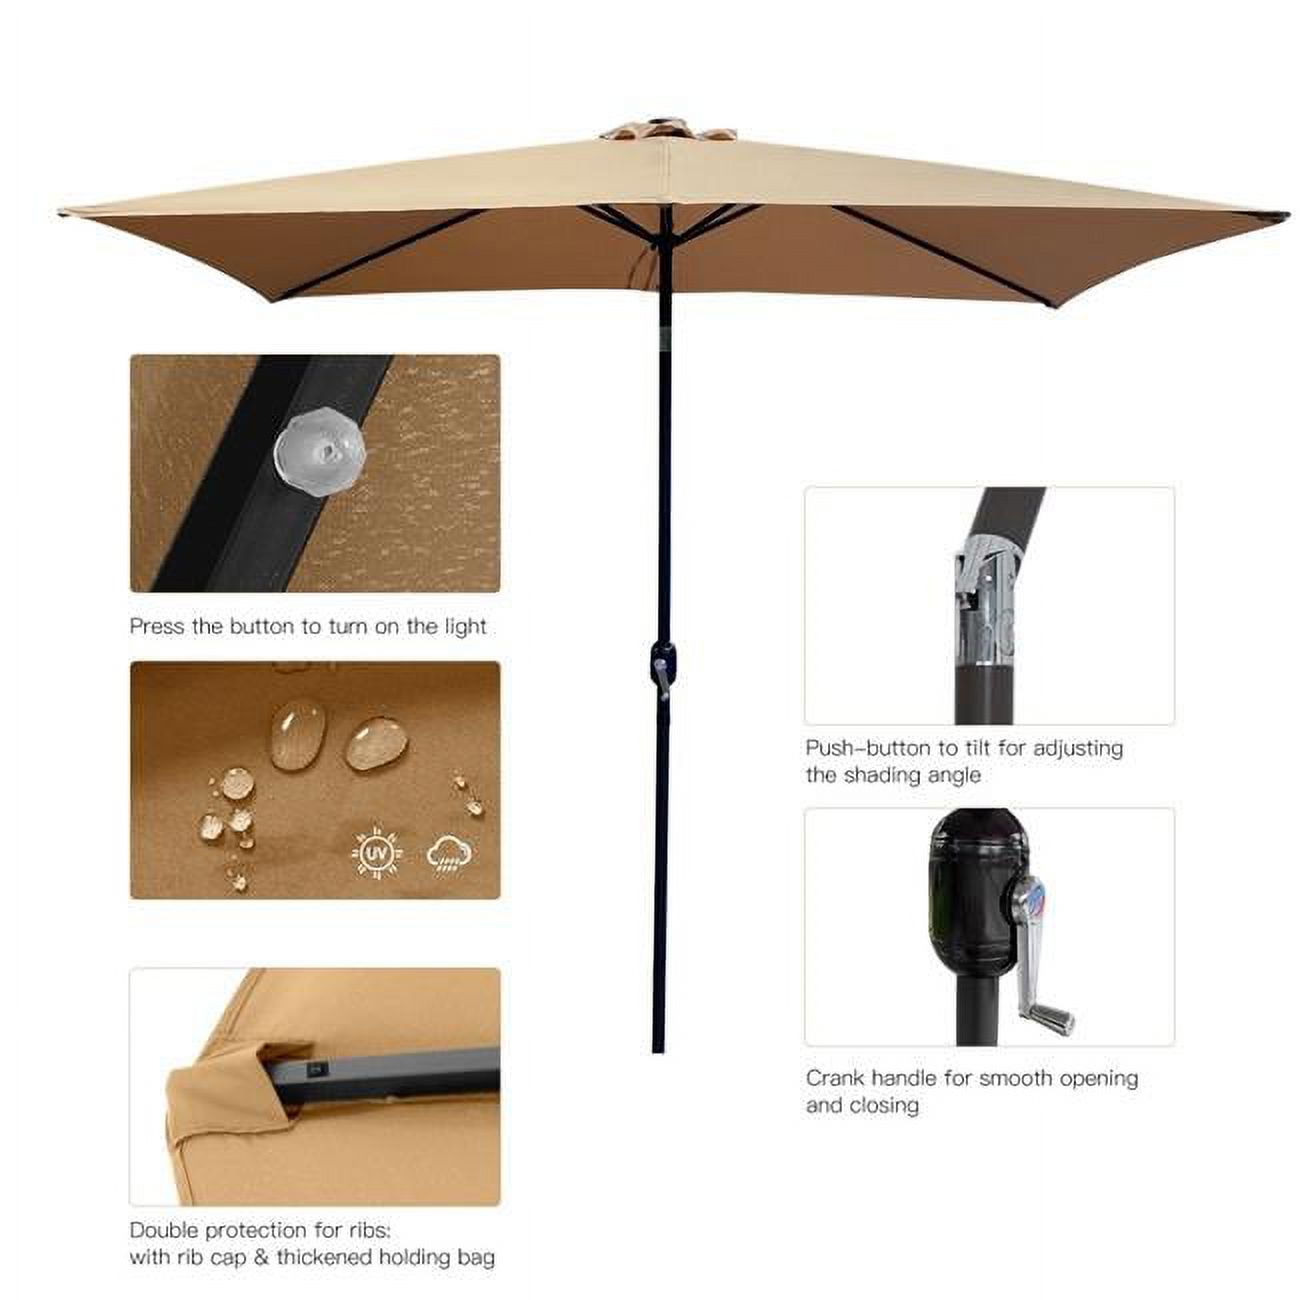 Direct Wicker  Outdoor Patio Solar Umbrella 10 Ft x 6.5 Ft Rectangular with Crank Weather Resistant, Taupe - image 1 of 1